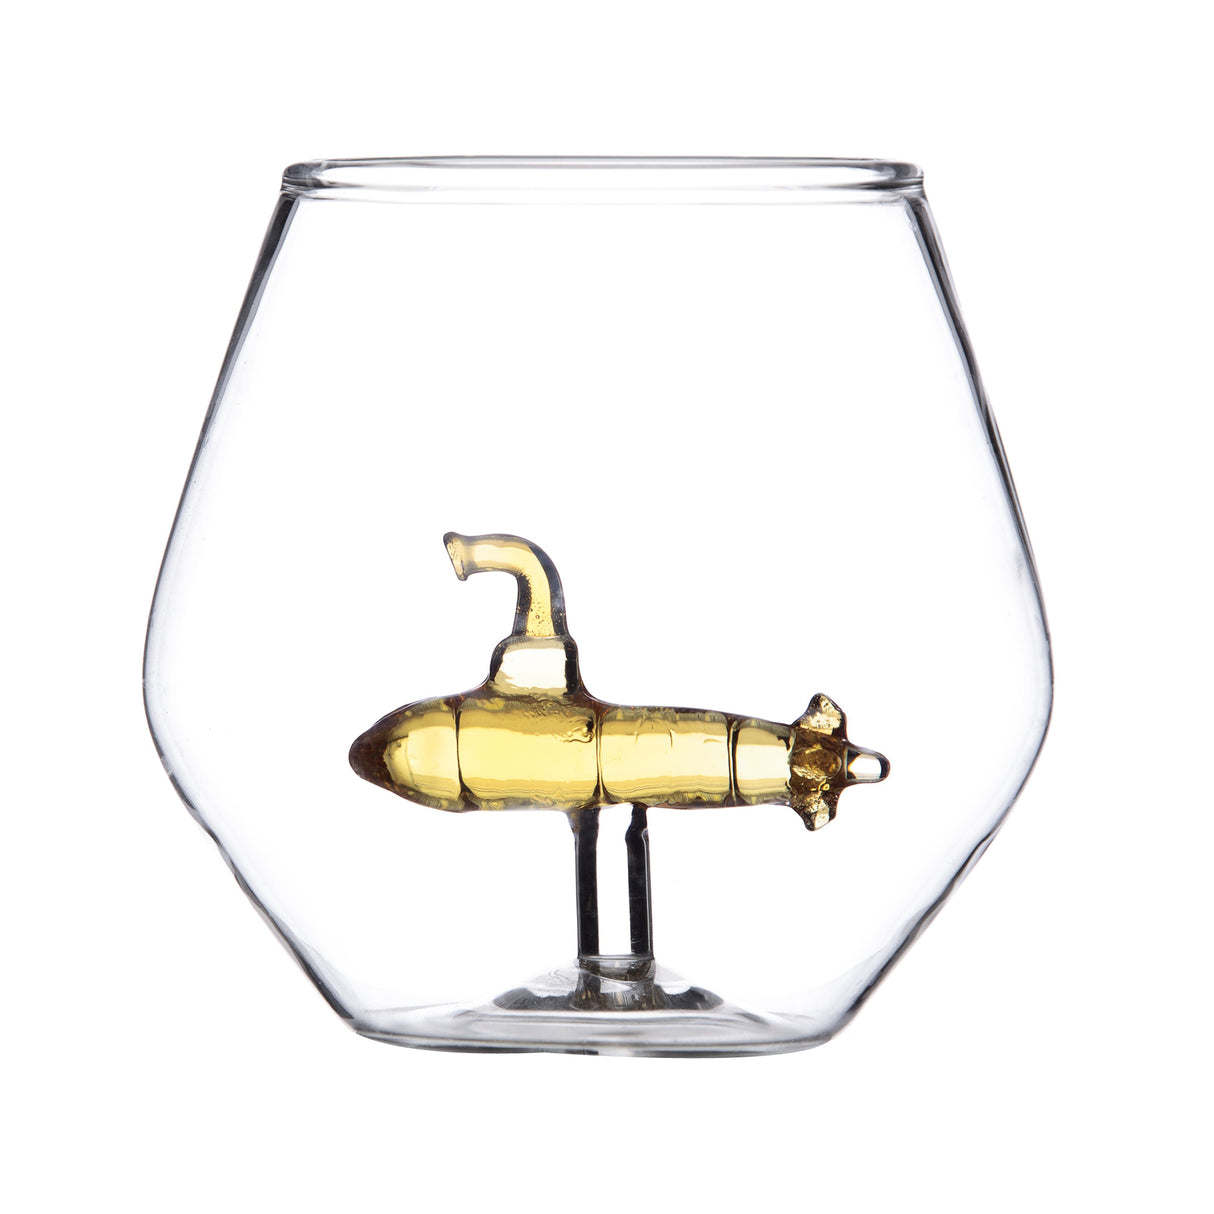 Submarine in a Glass